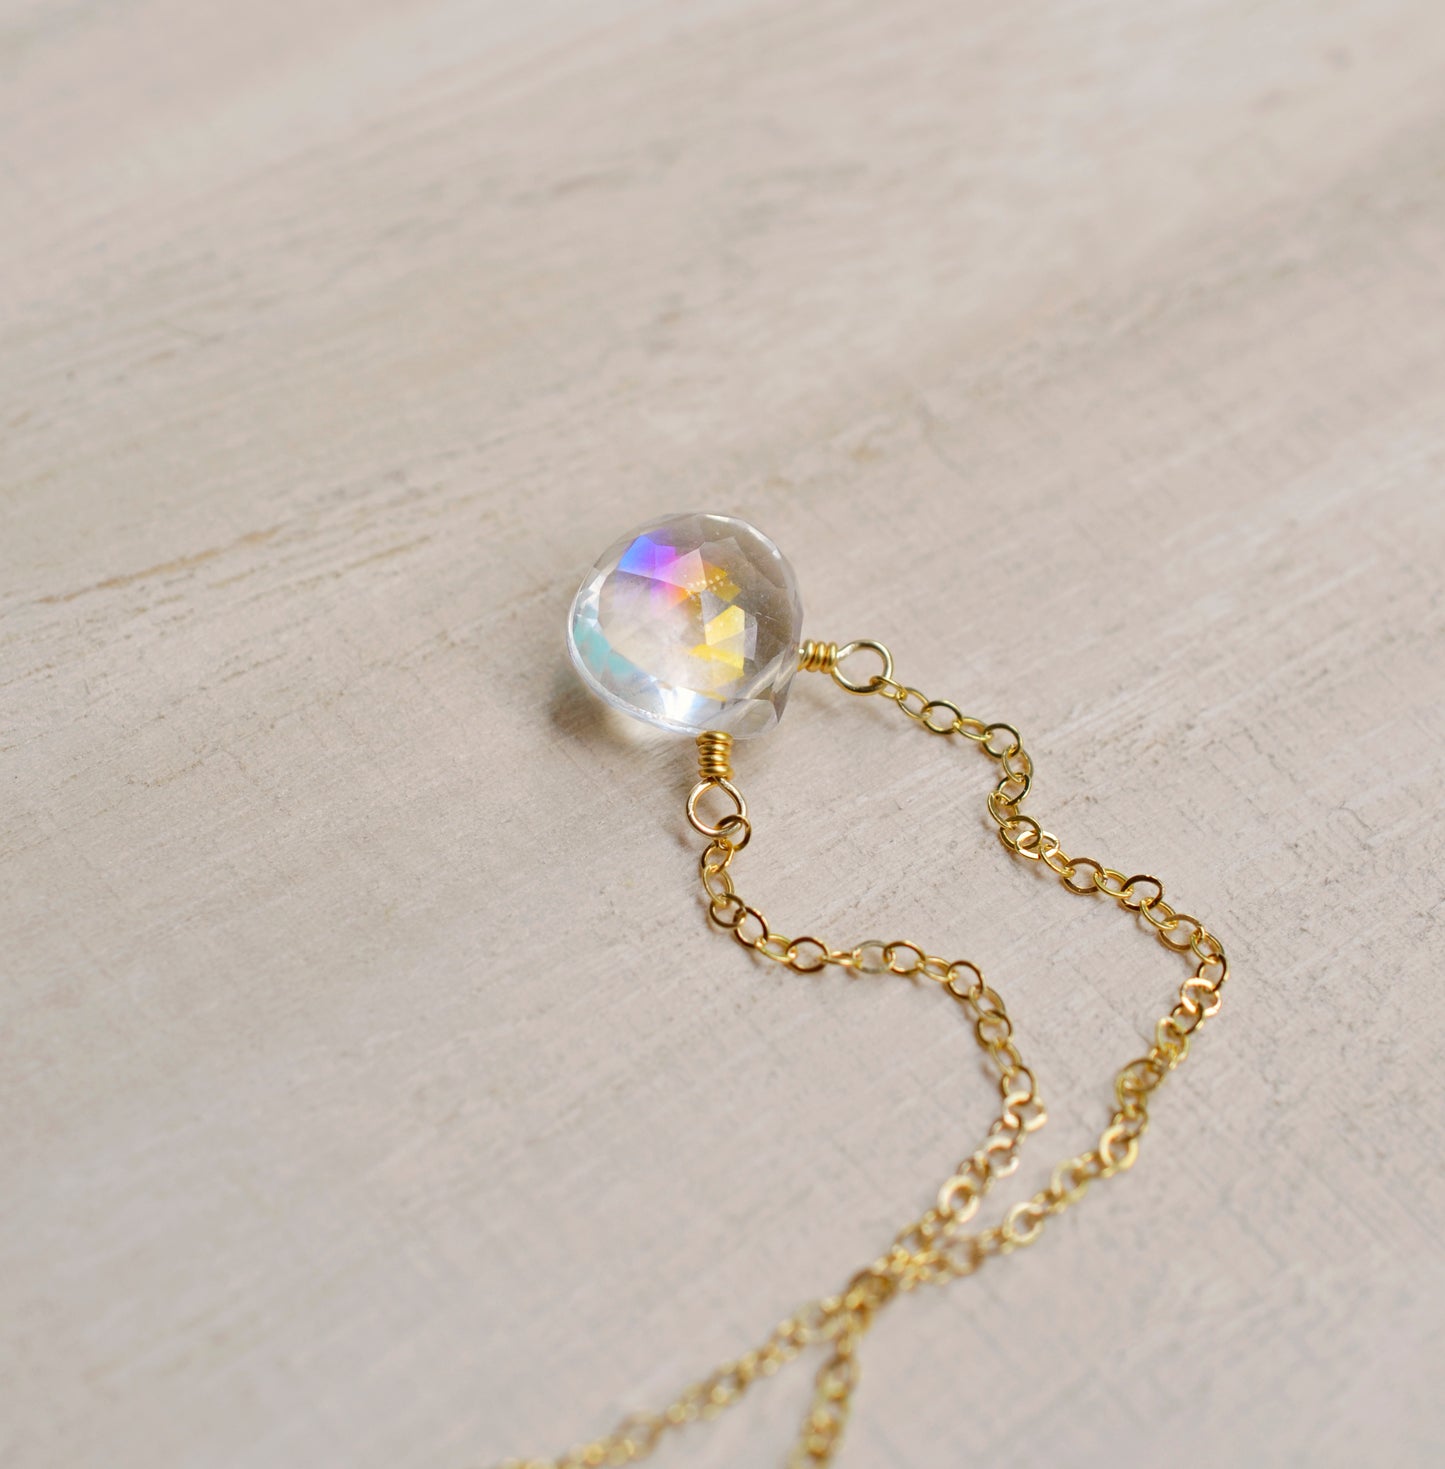 Close up of the rainbow colors in the Mystic Topaz crystal. The 14k gold filled style is shown.